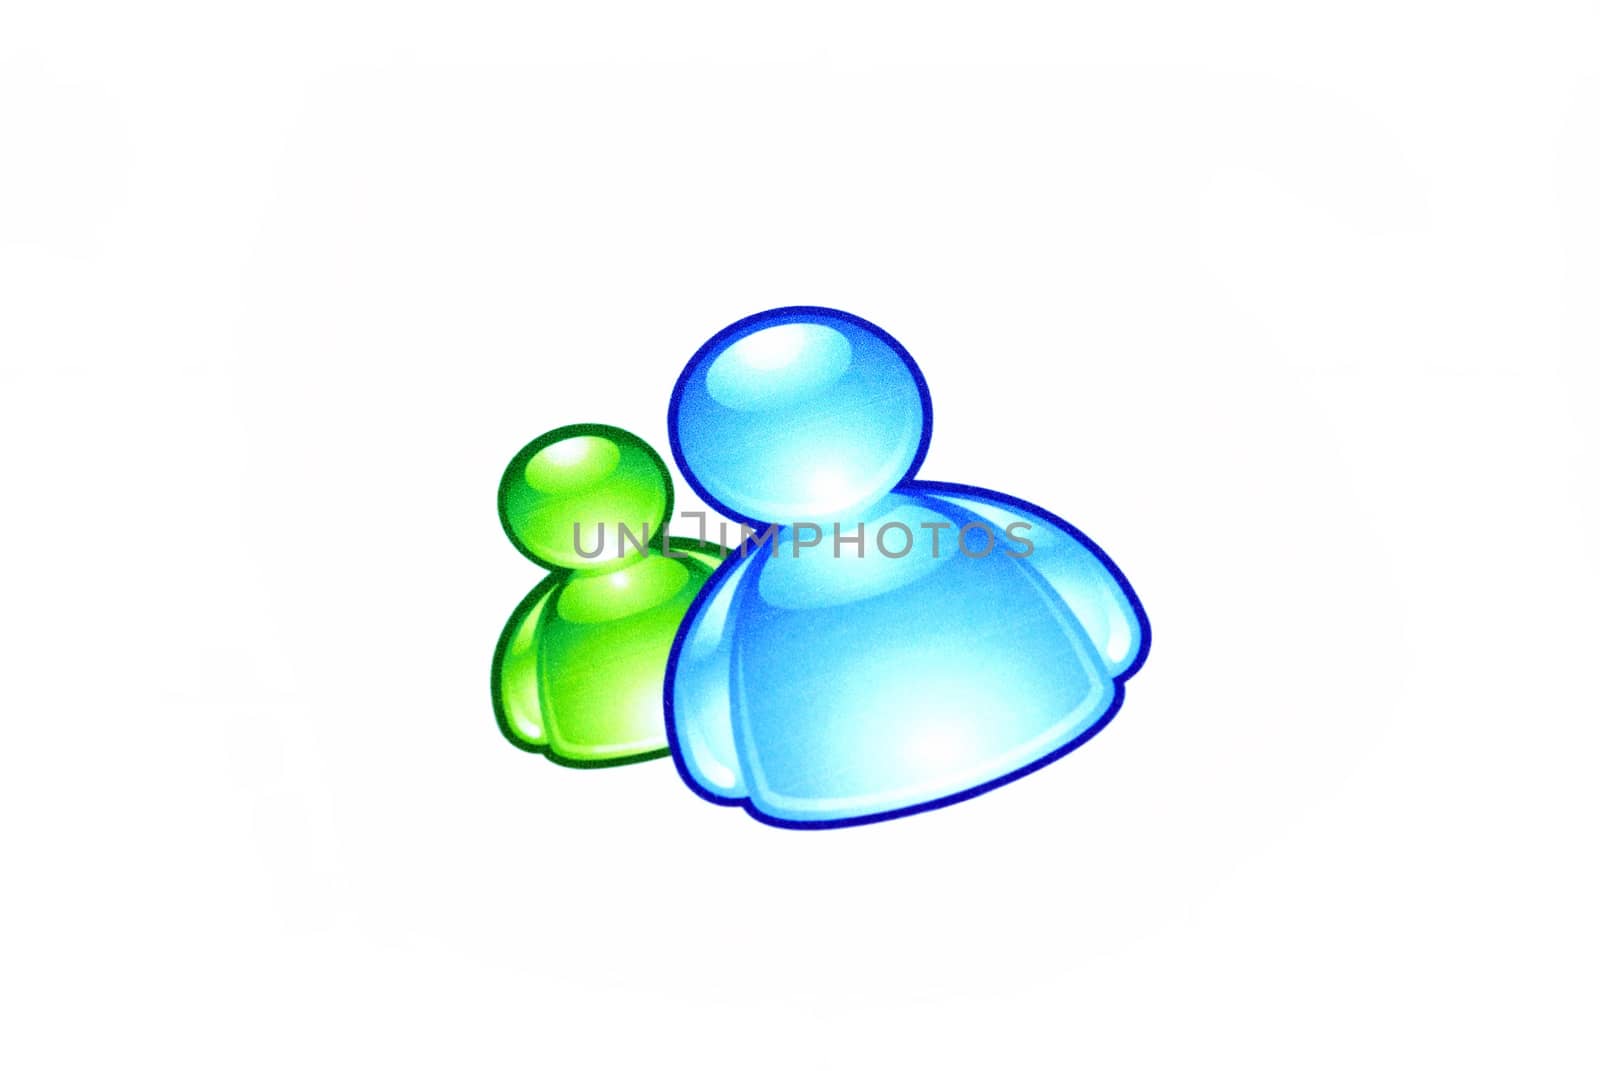 MSN - instant messaging on internet, chat with other